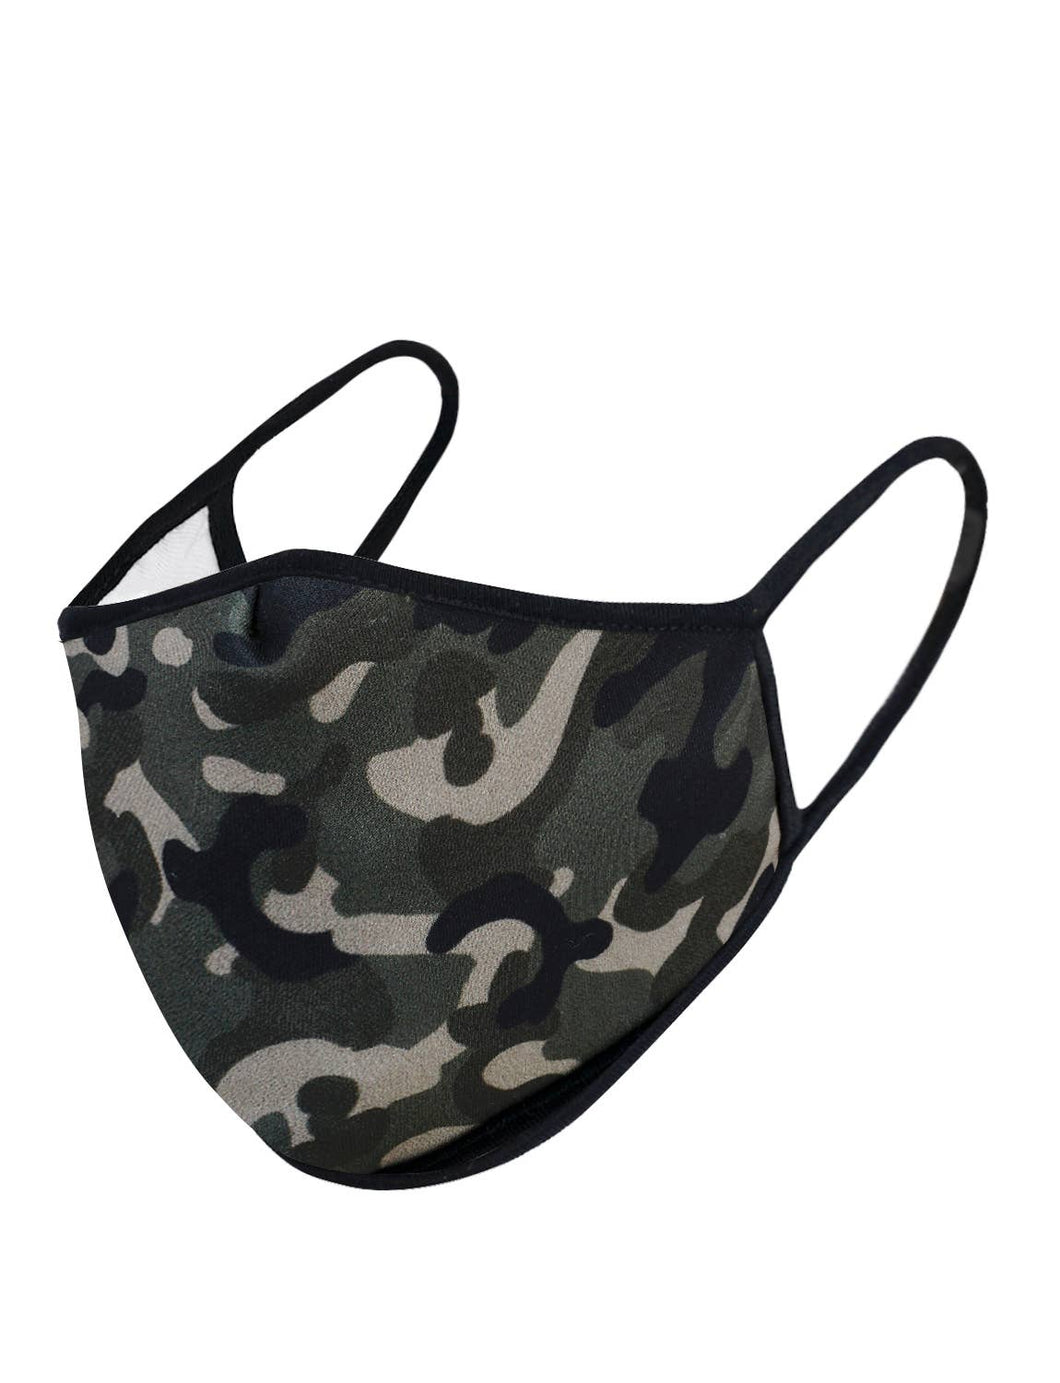 ARMY Camouflage Print Washable and Reusable Face Mask